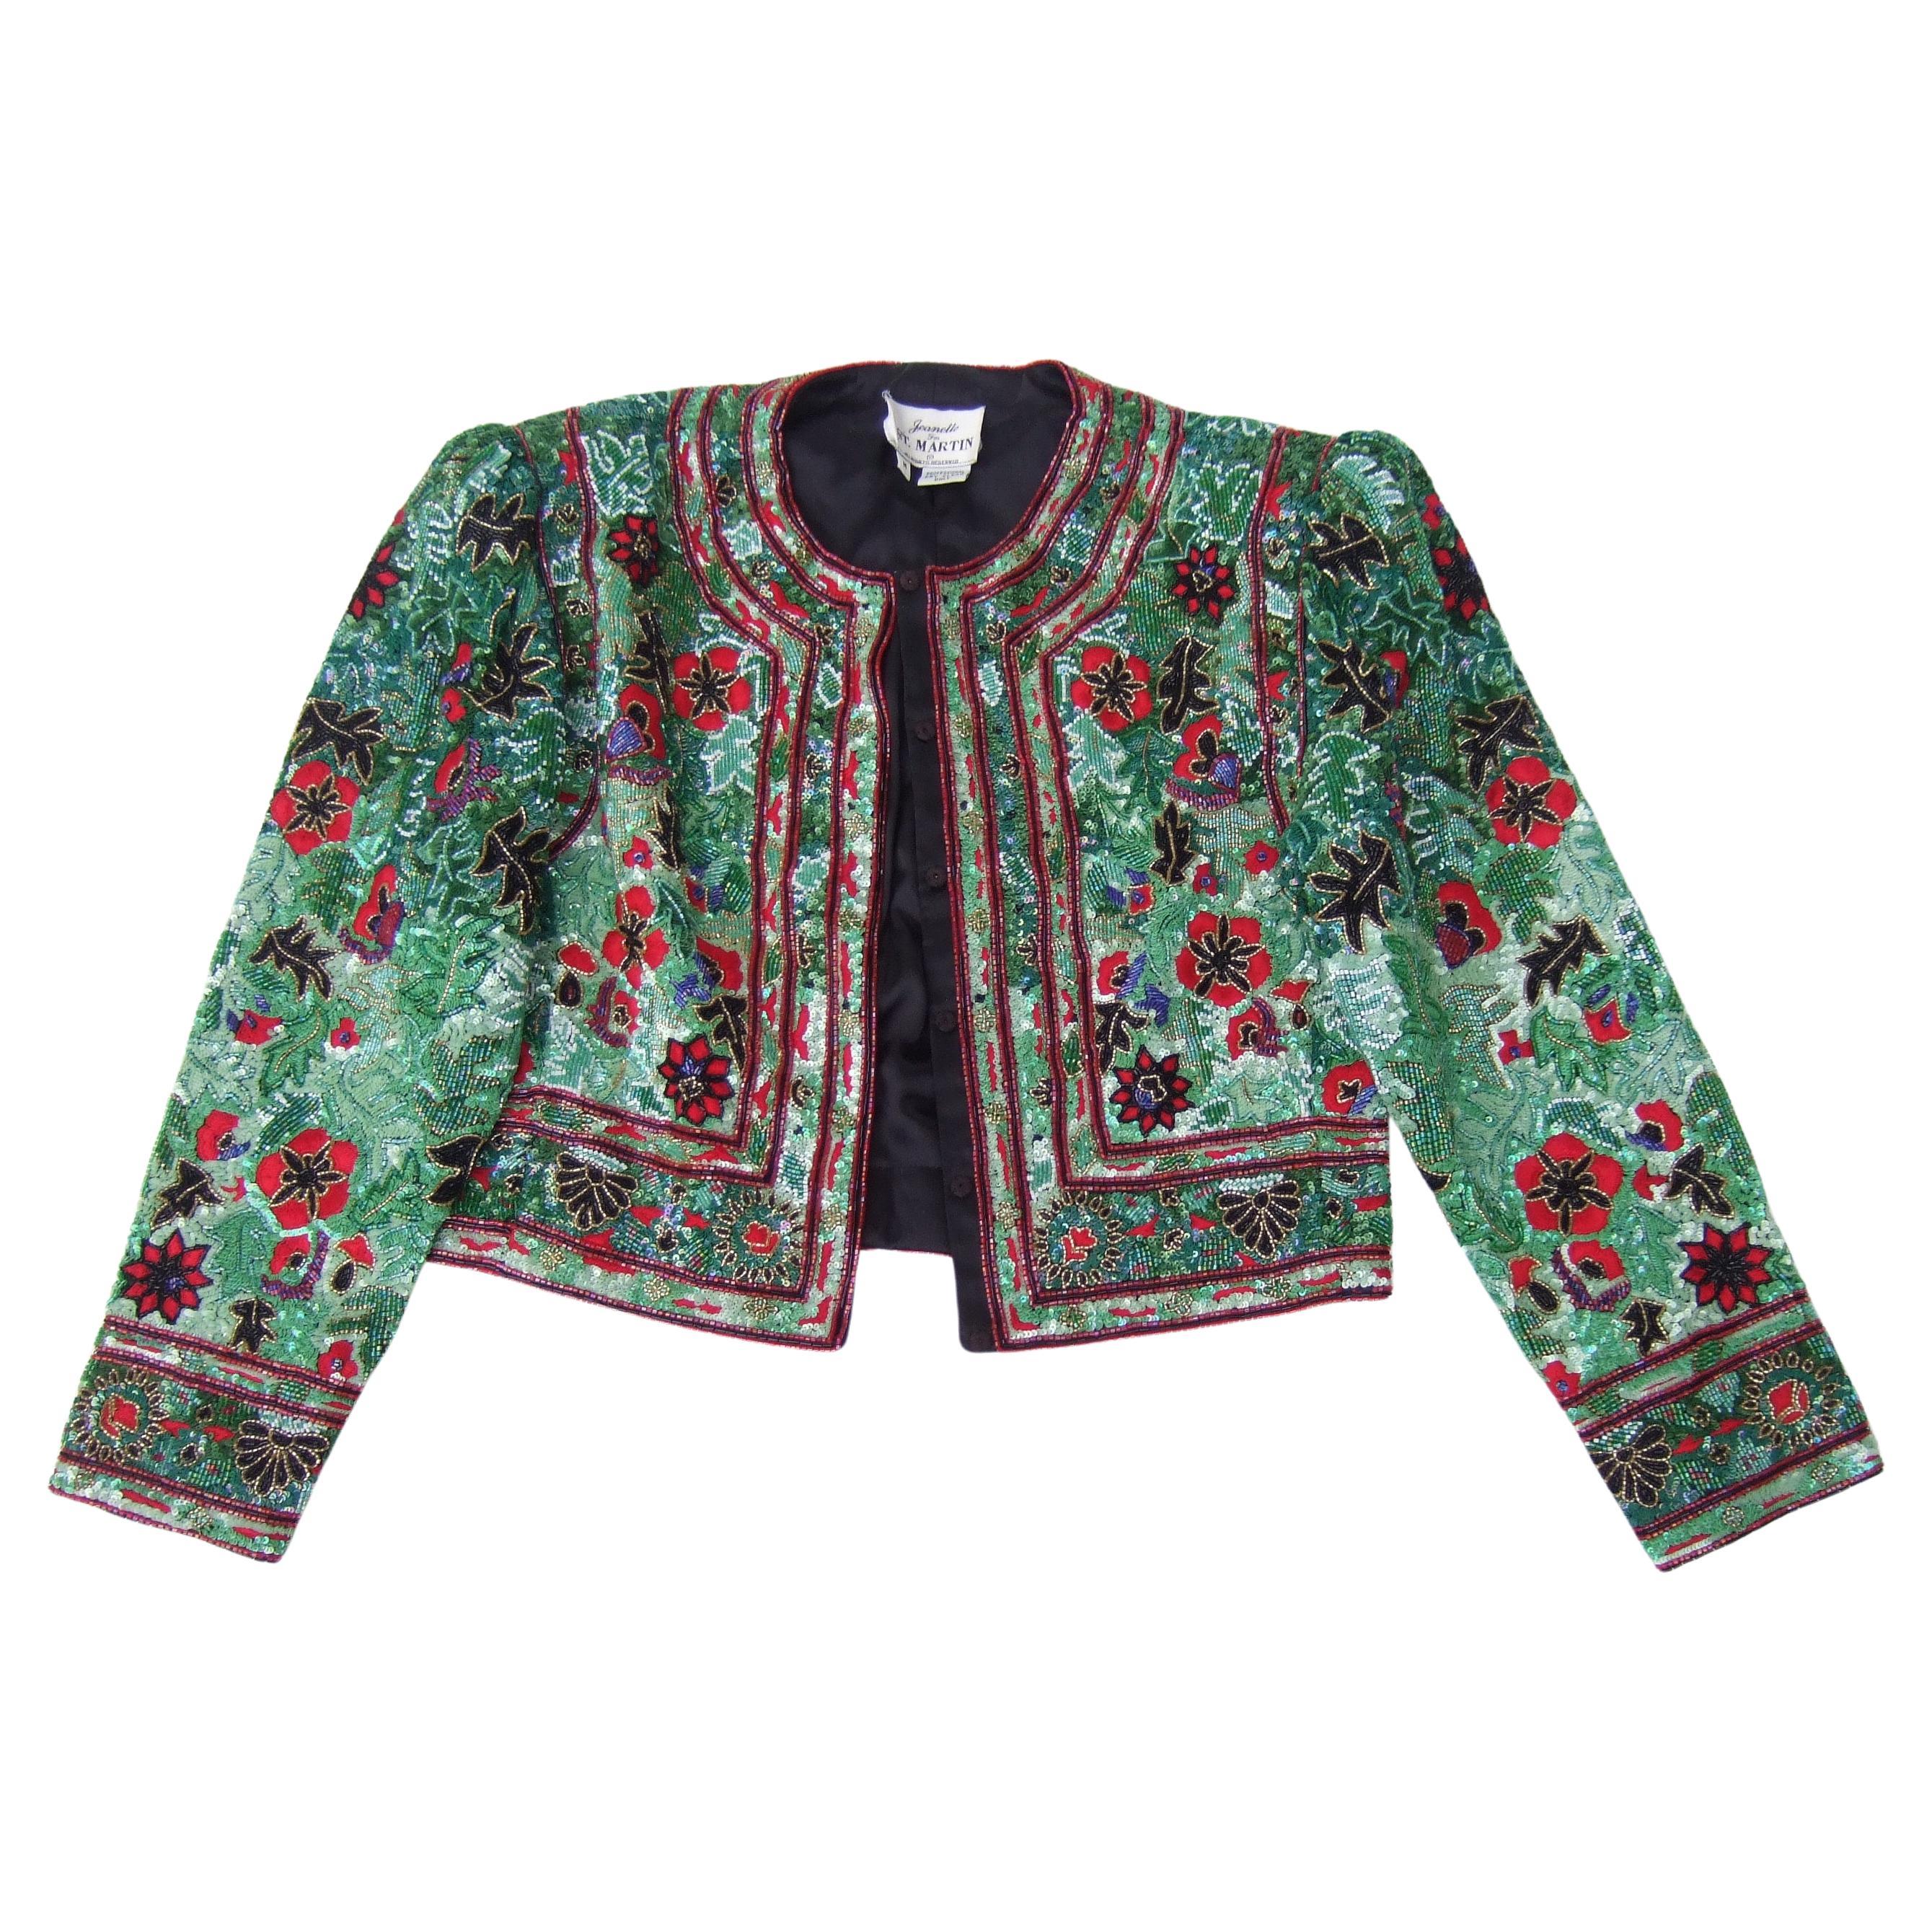 Exquisite Elaborate Glass Floral Beaded Embroidered Bolero Jacket c 1980s For Sale